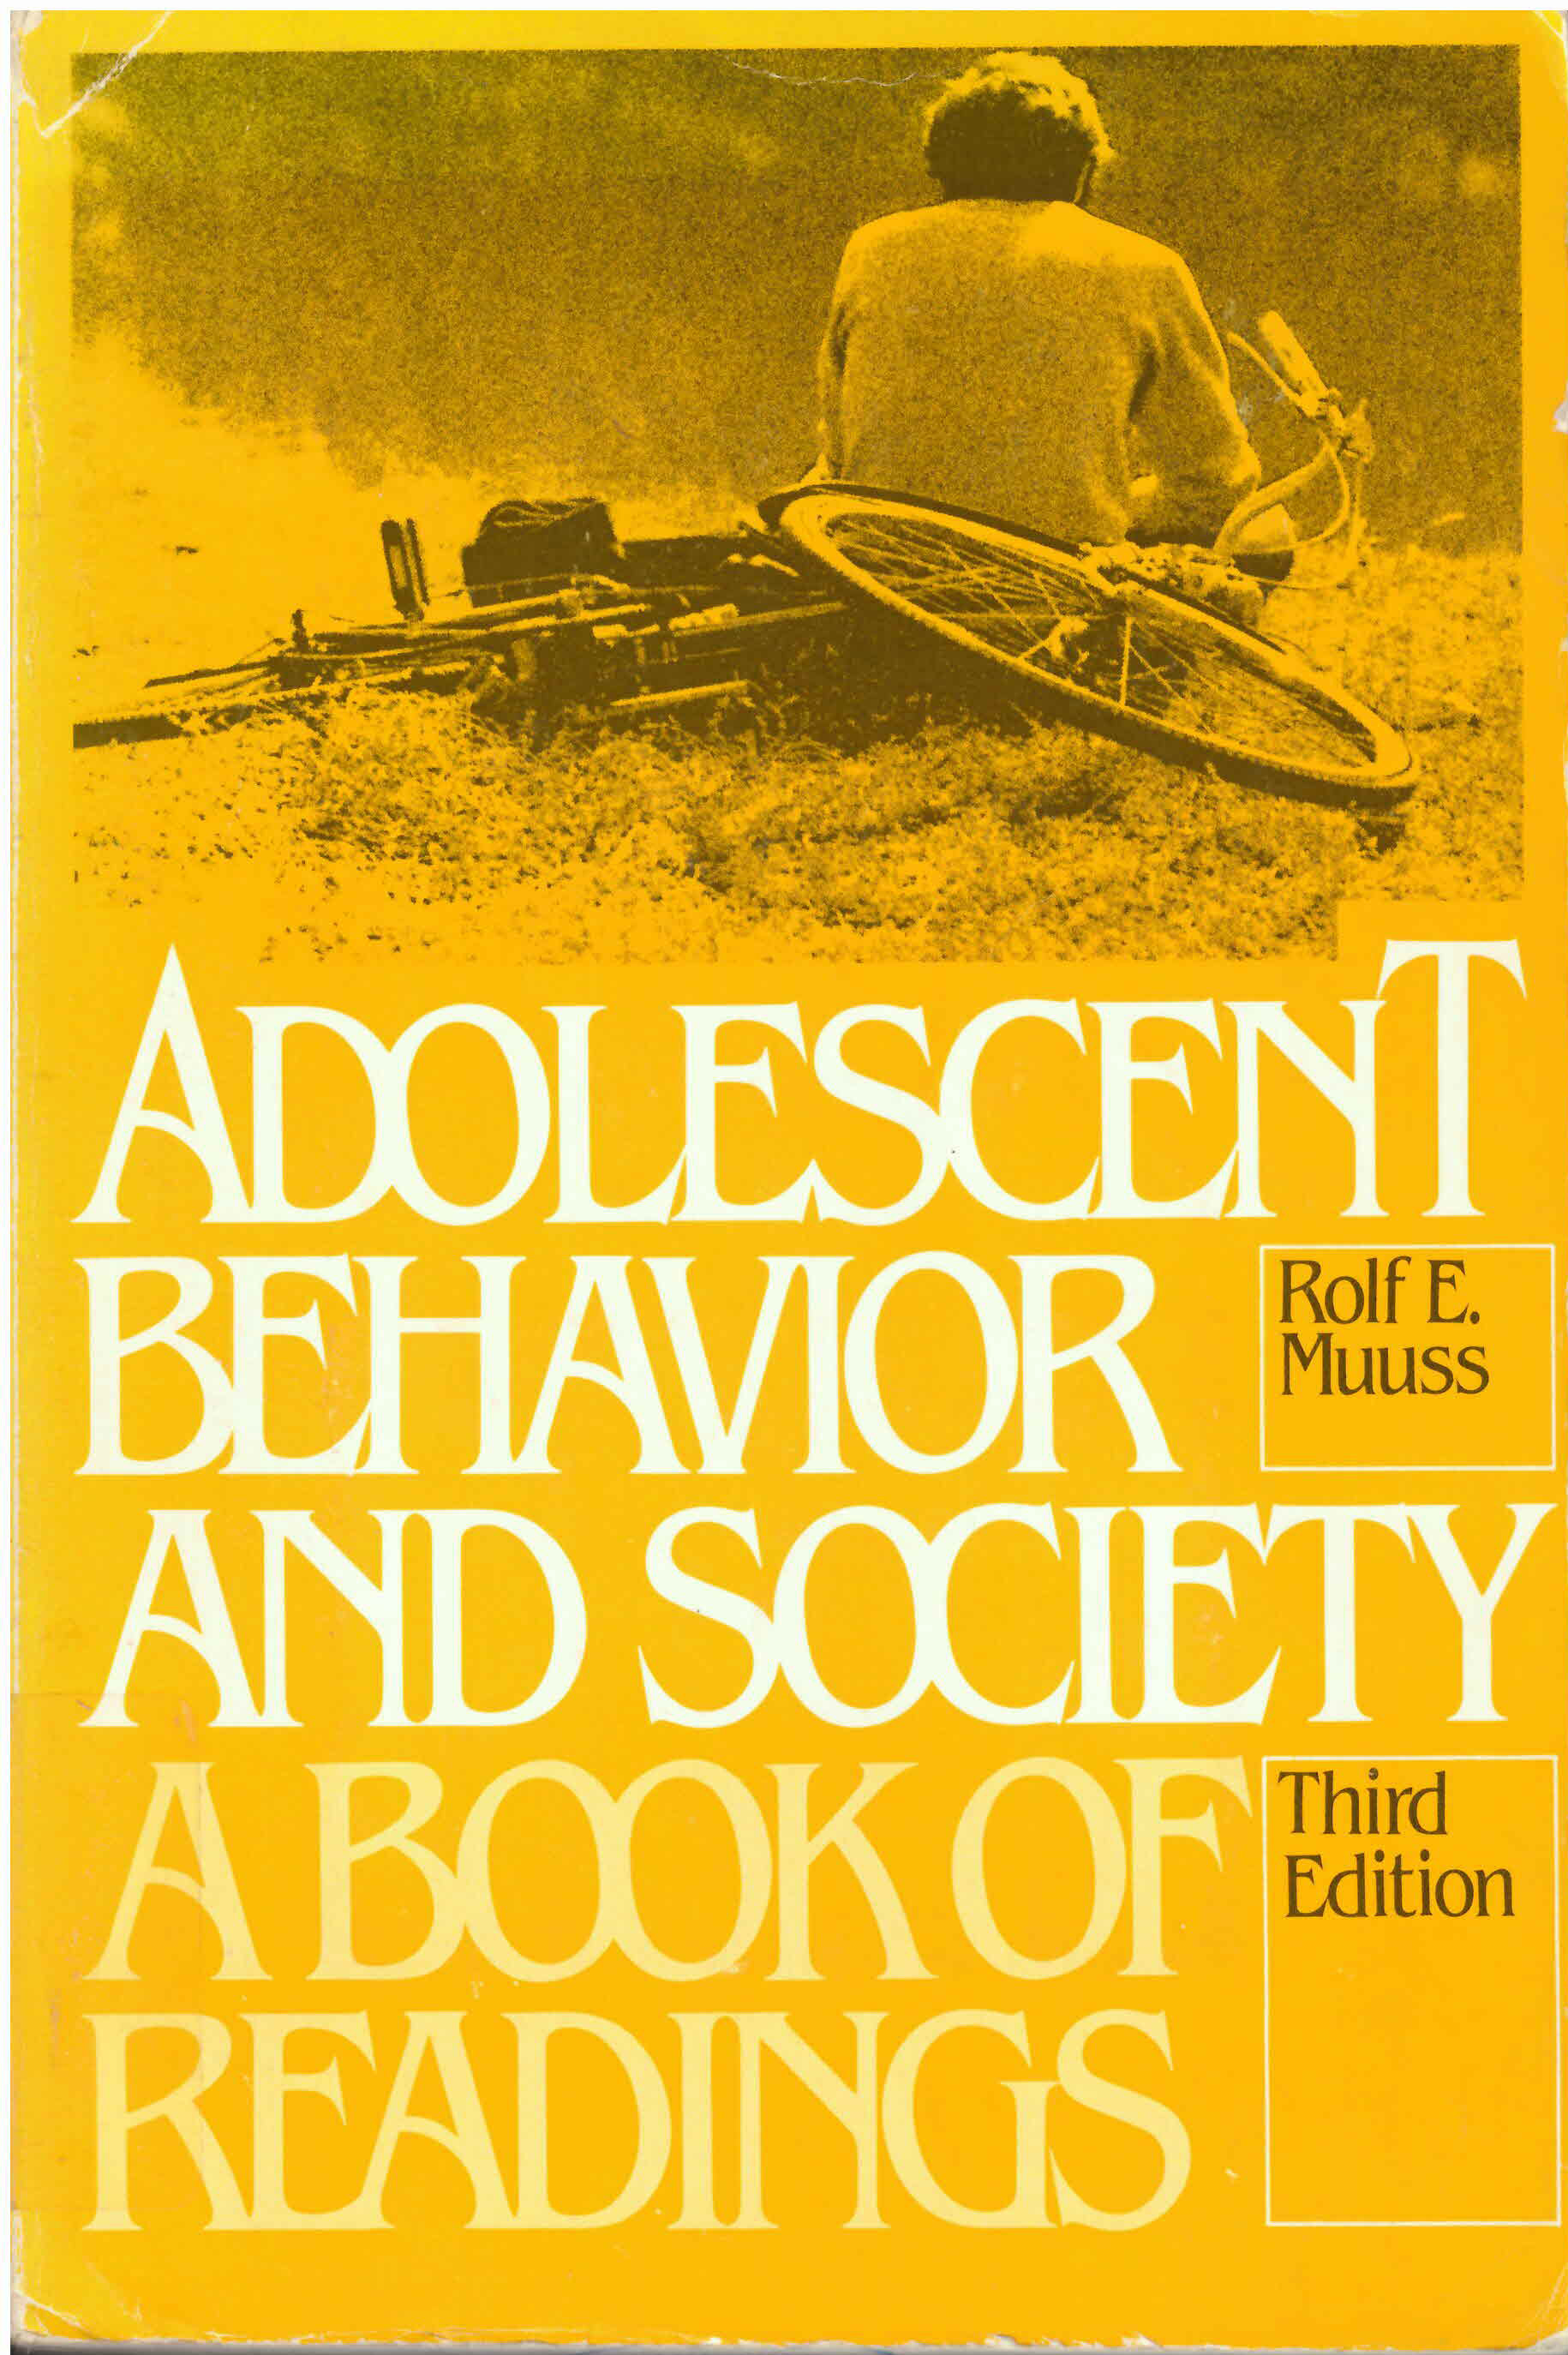 Adolescent behavior and society : a book of readings